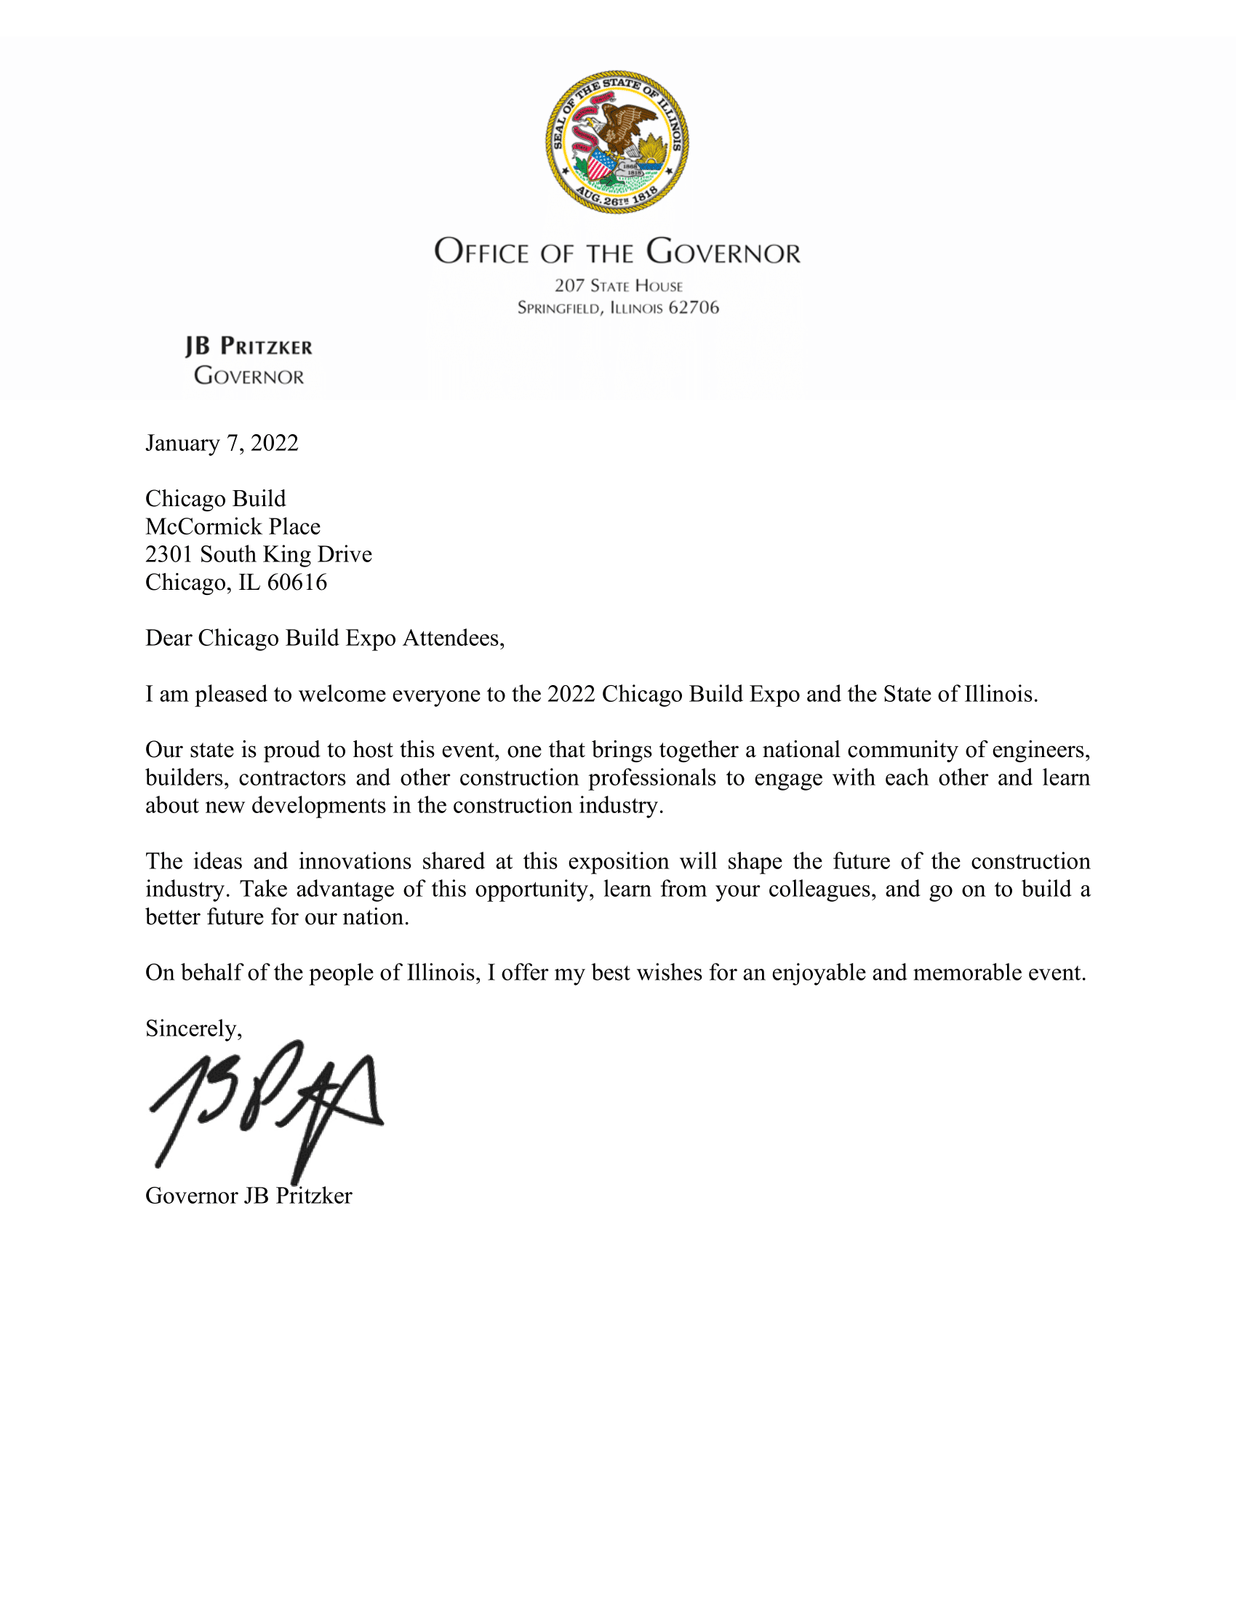 Letter from Governor